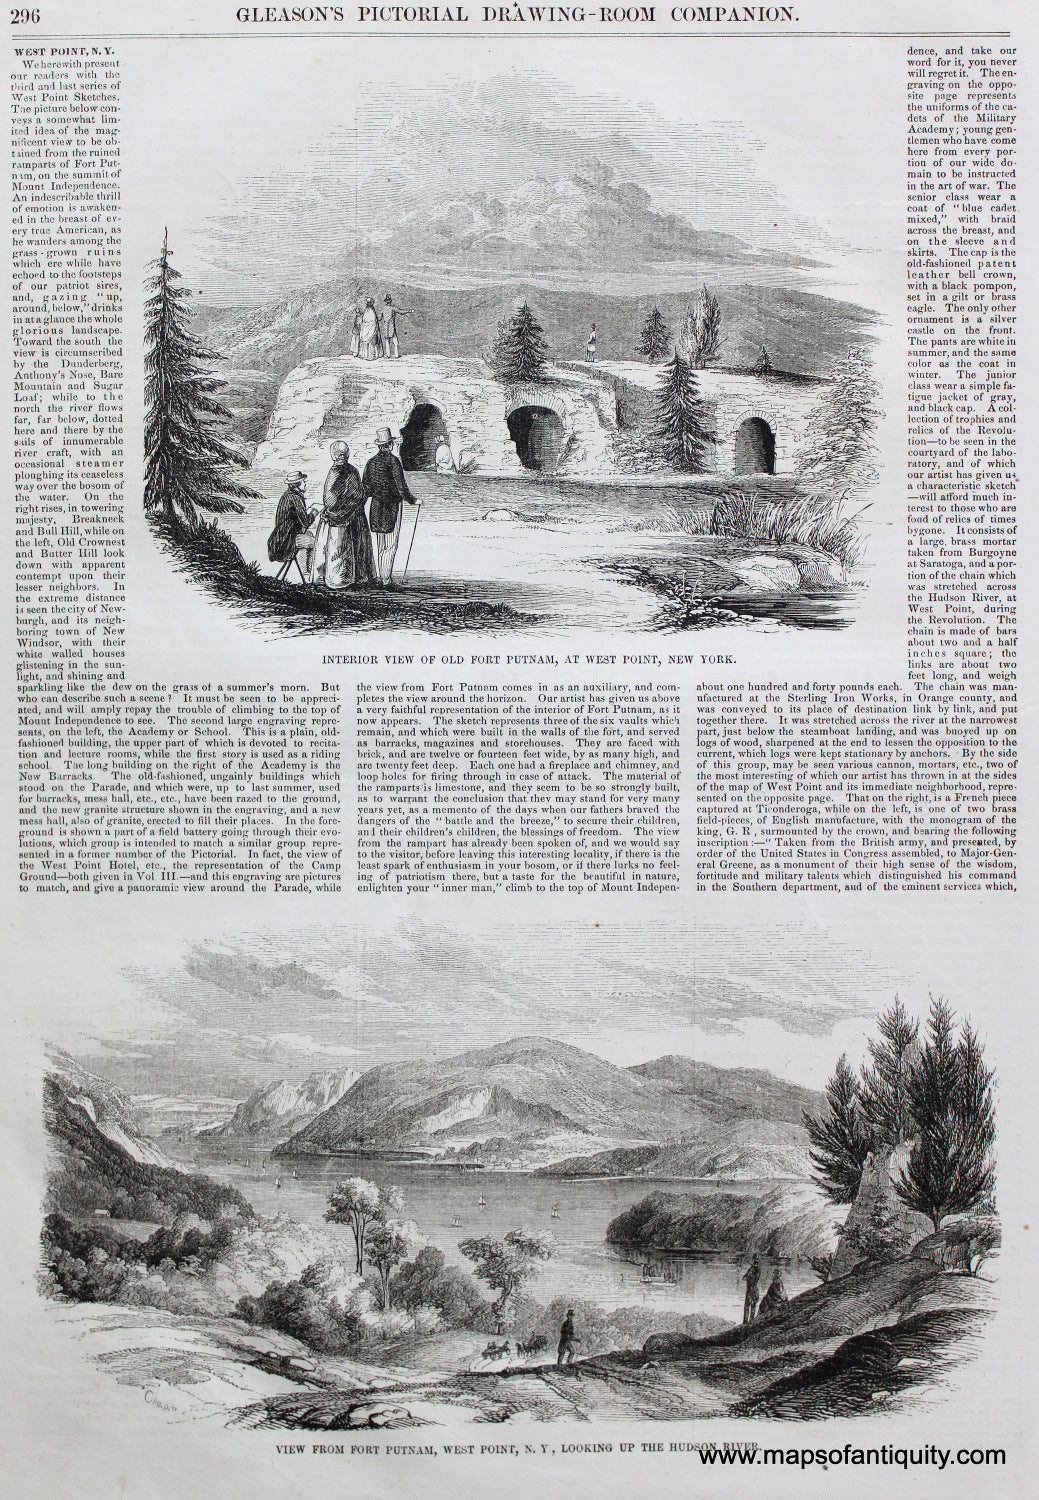 Antique-Black-and-White-Print-Views-of-and-from-Fort-Putnam-West-Point-**********-College-Prints-West-Point-1853-Gleason's-Pictorial-Drawing-Room-Companion-Maps-Of-Antiquity